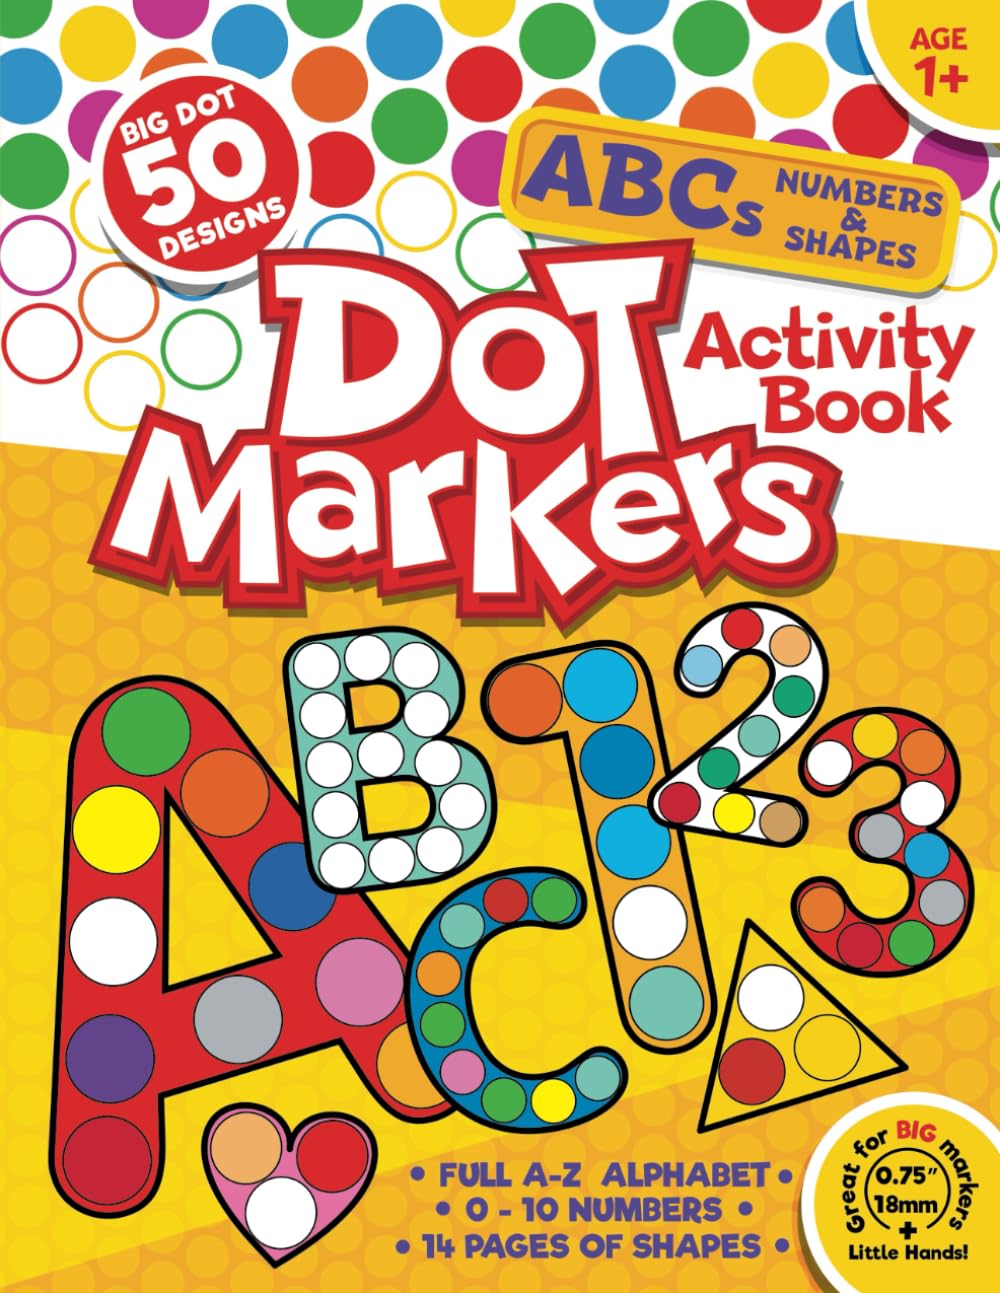 Dot Markers Activity Book ABC: 50 BIG DOT Designs. Alphabet, Numbers 0-10 and Shapes for Kids Ages 1+ (Dot Marker Activity Books)